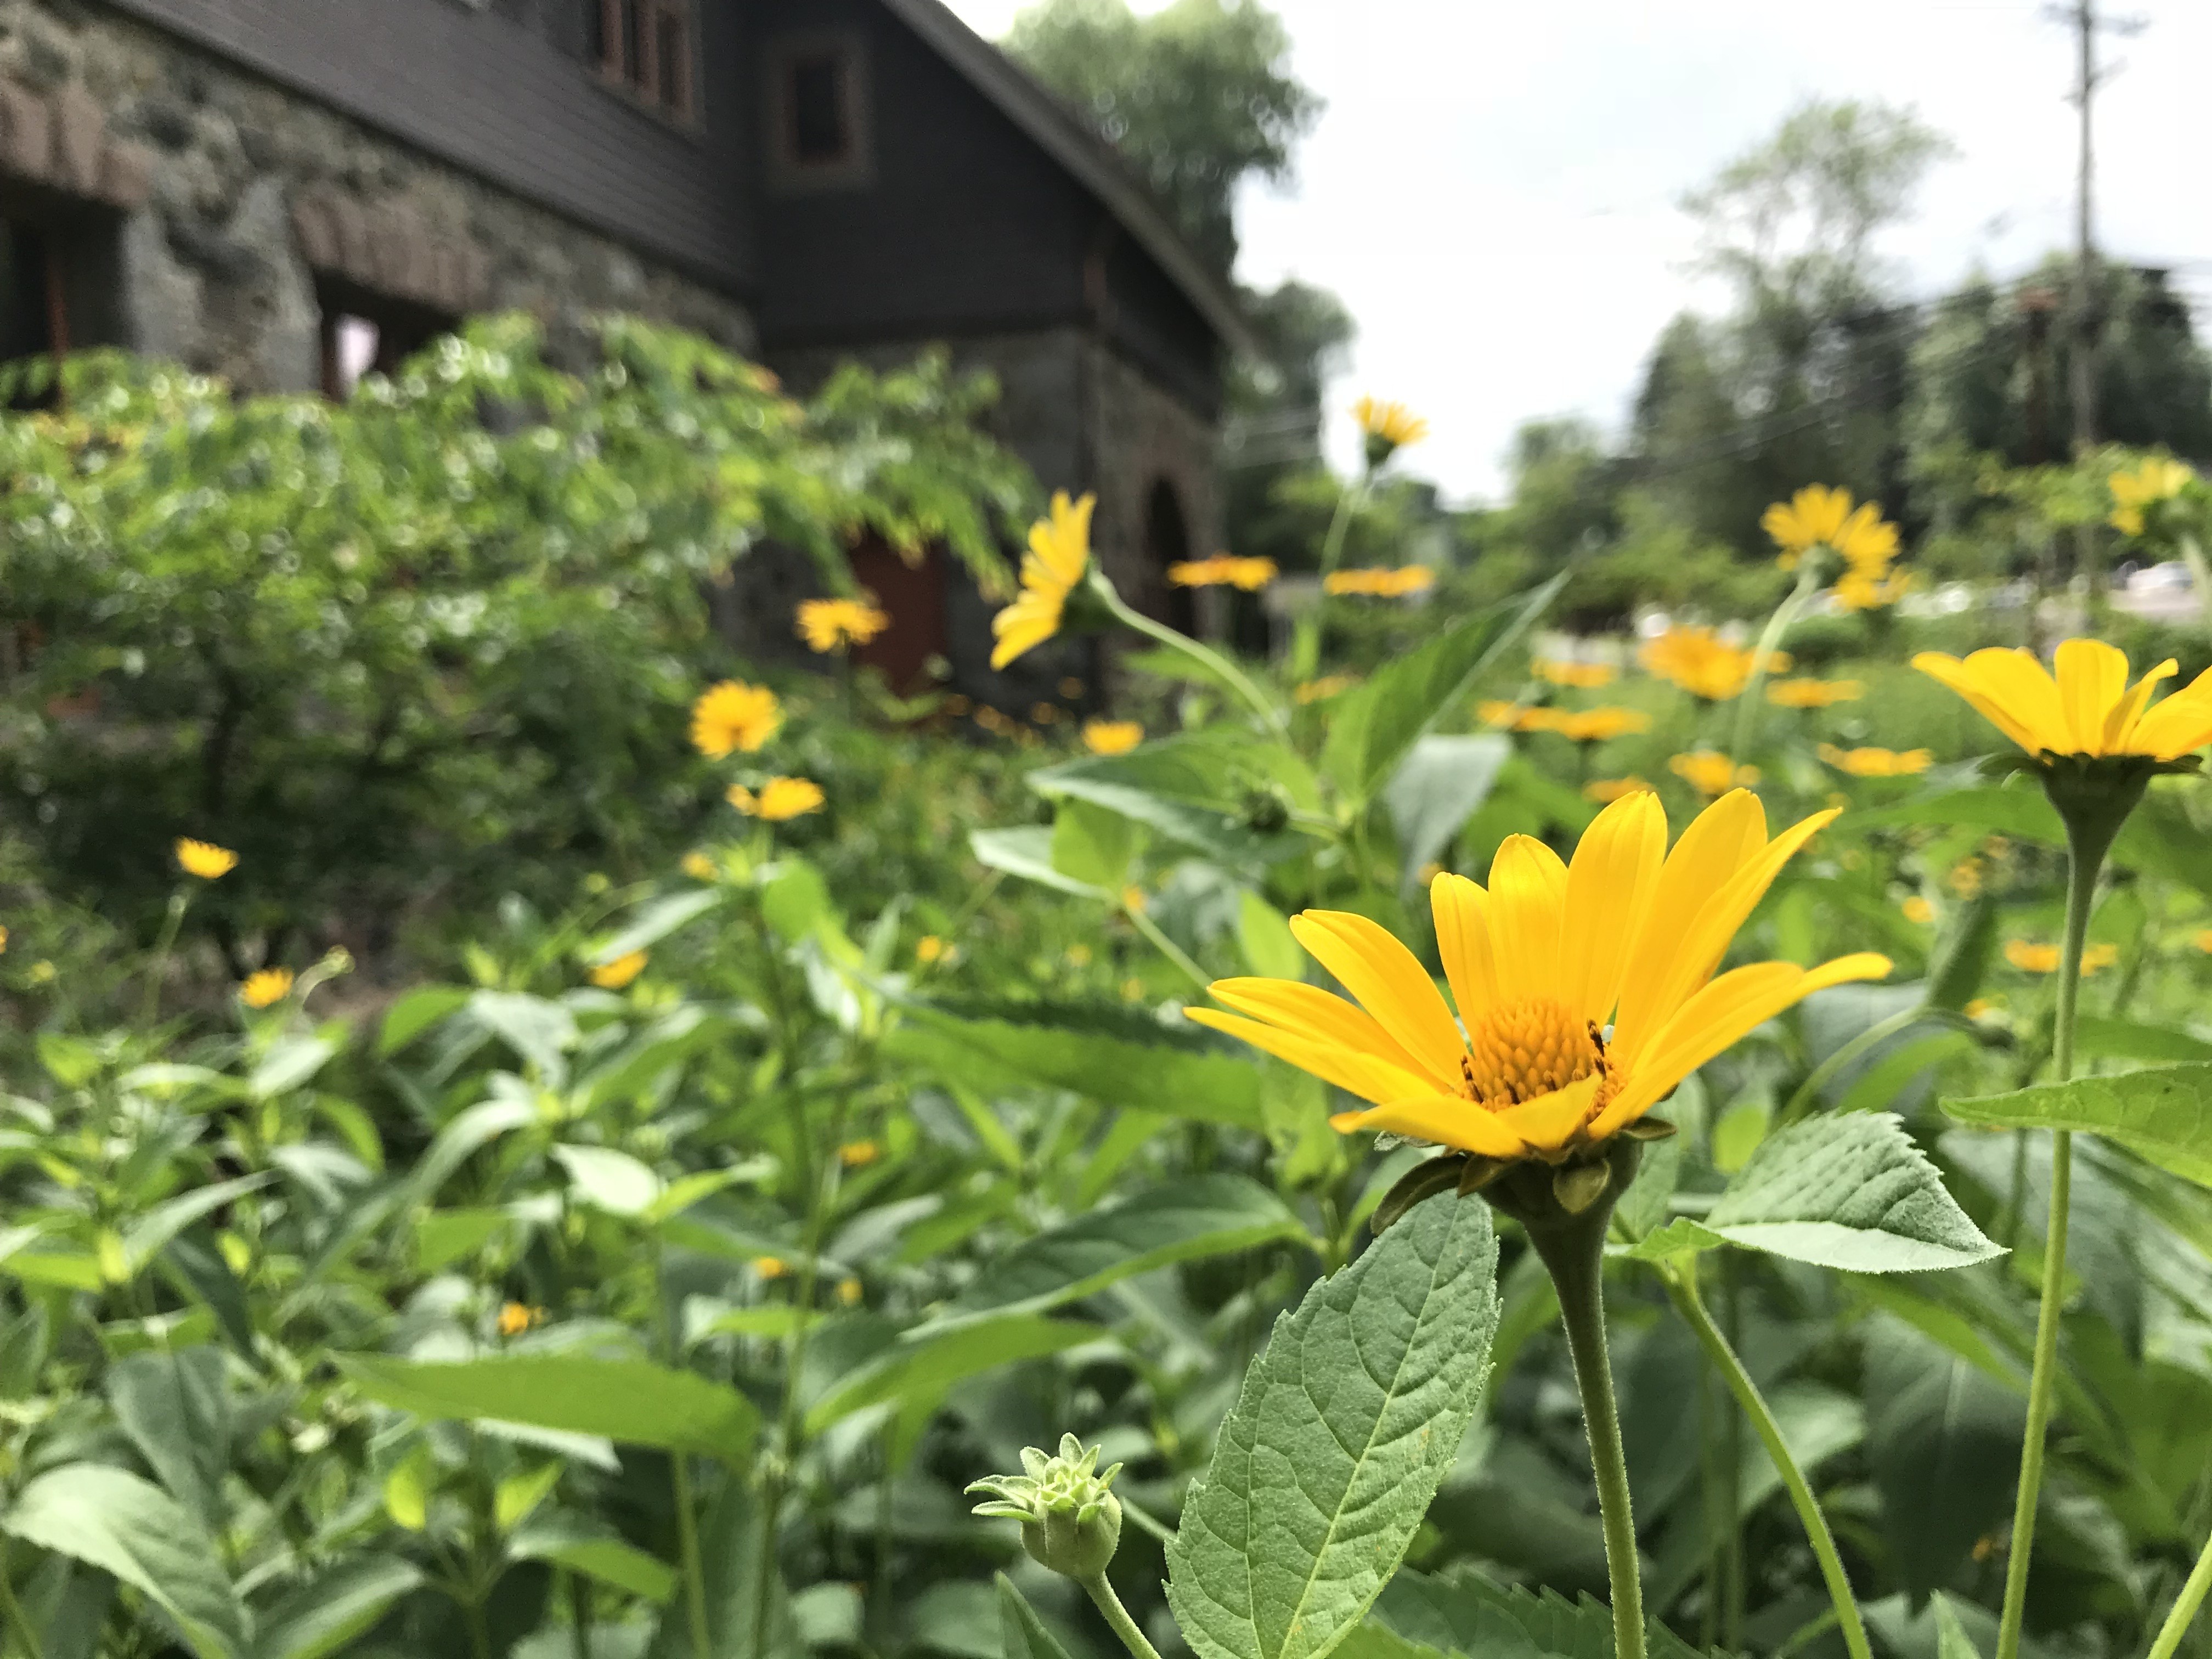 Woodland Sunflowers in bloom!